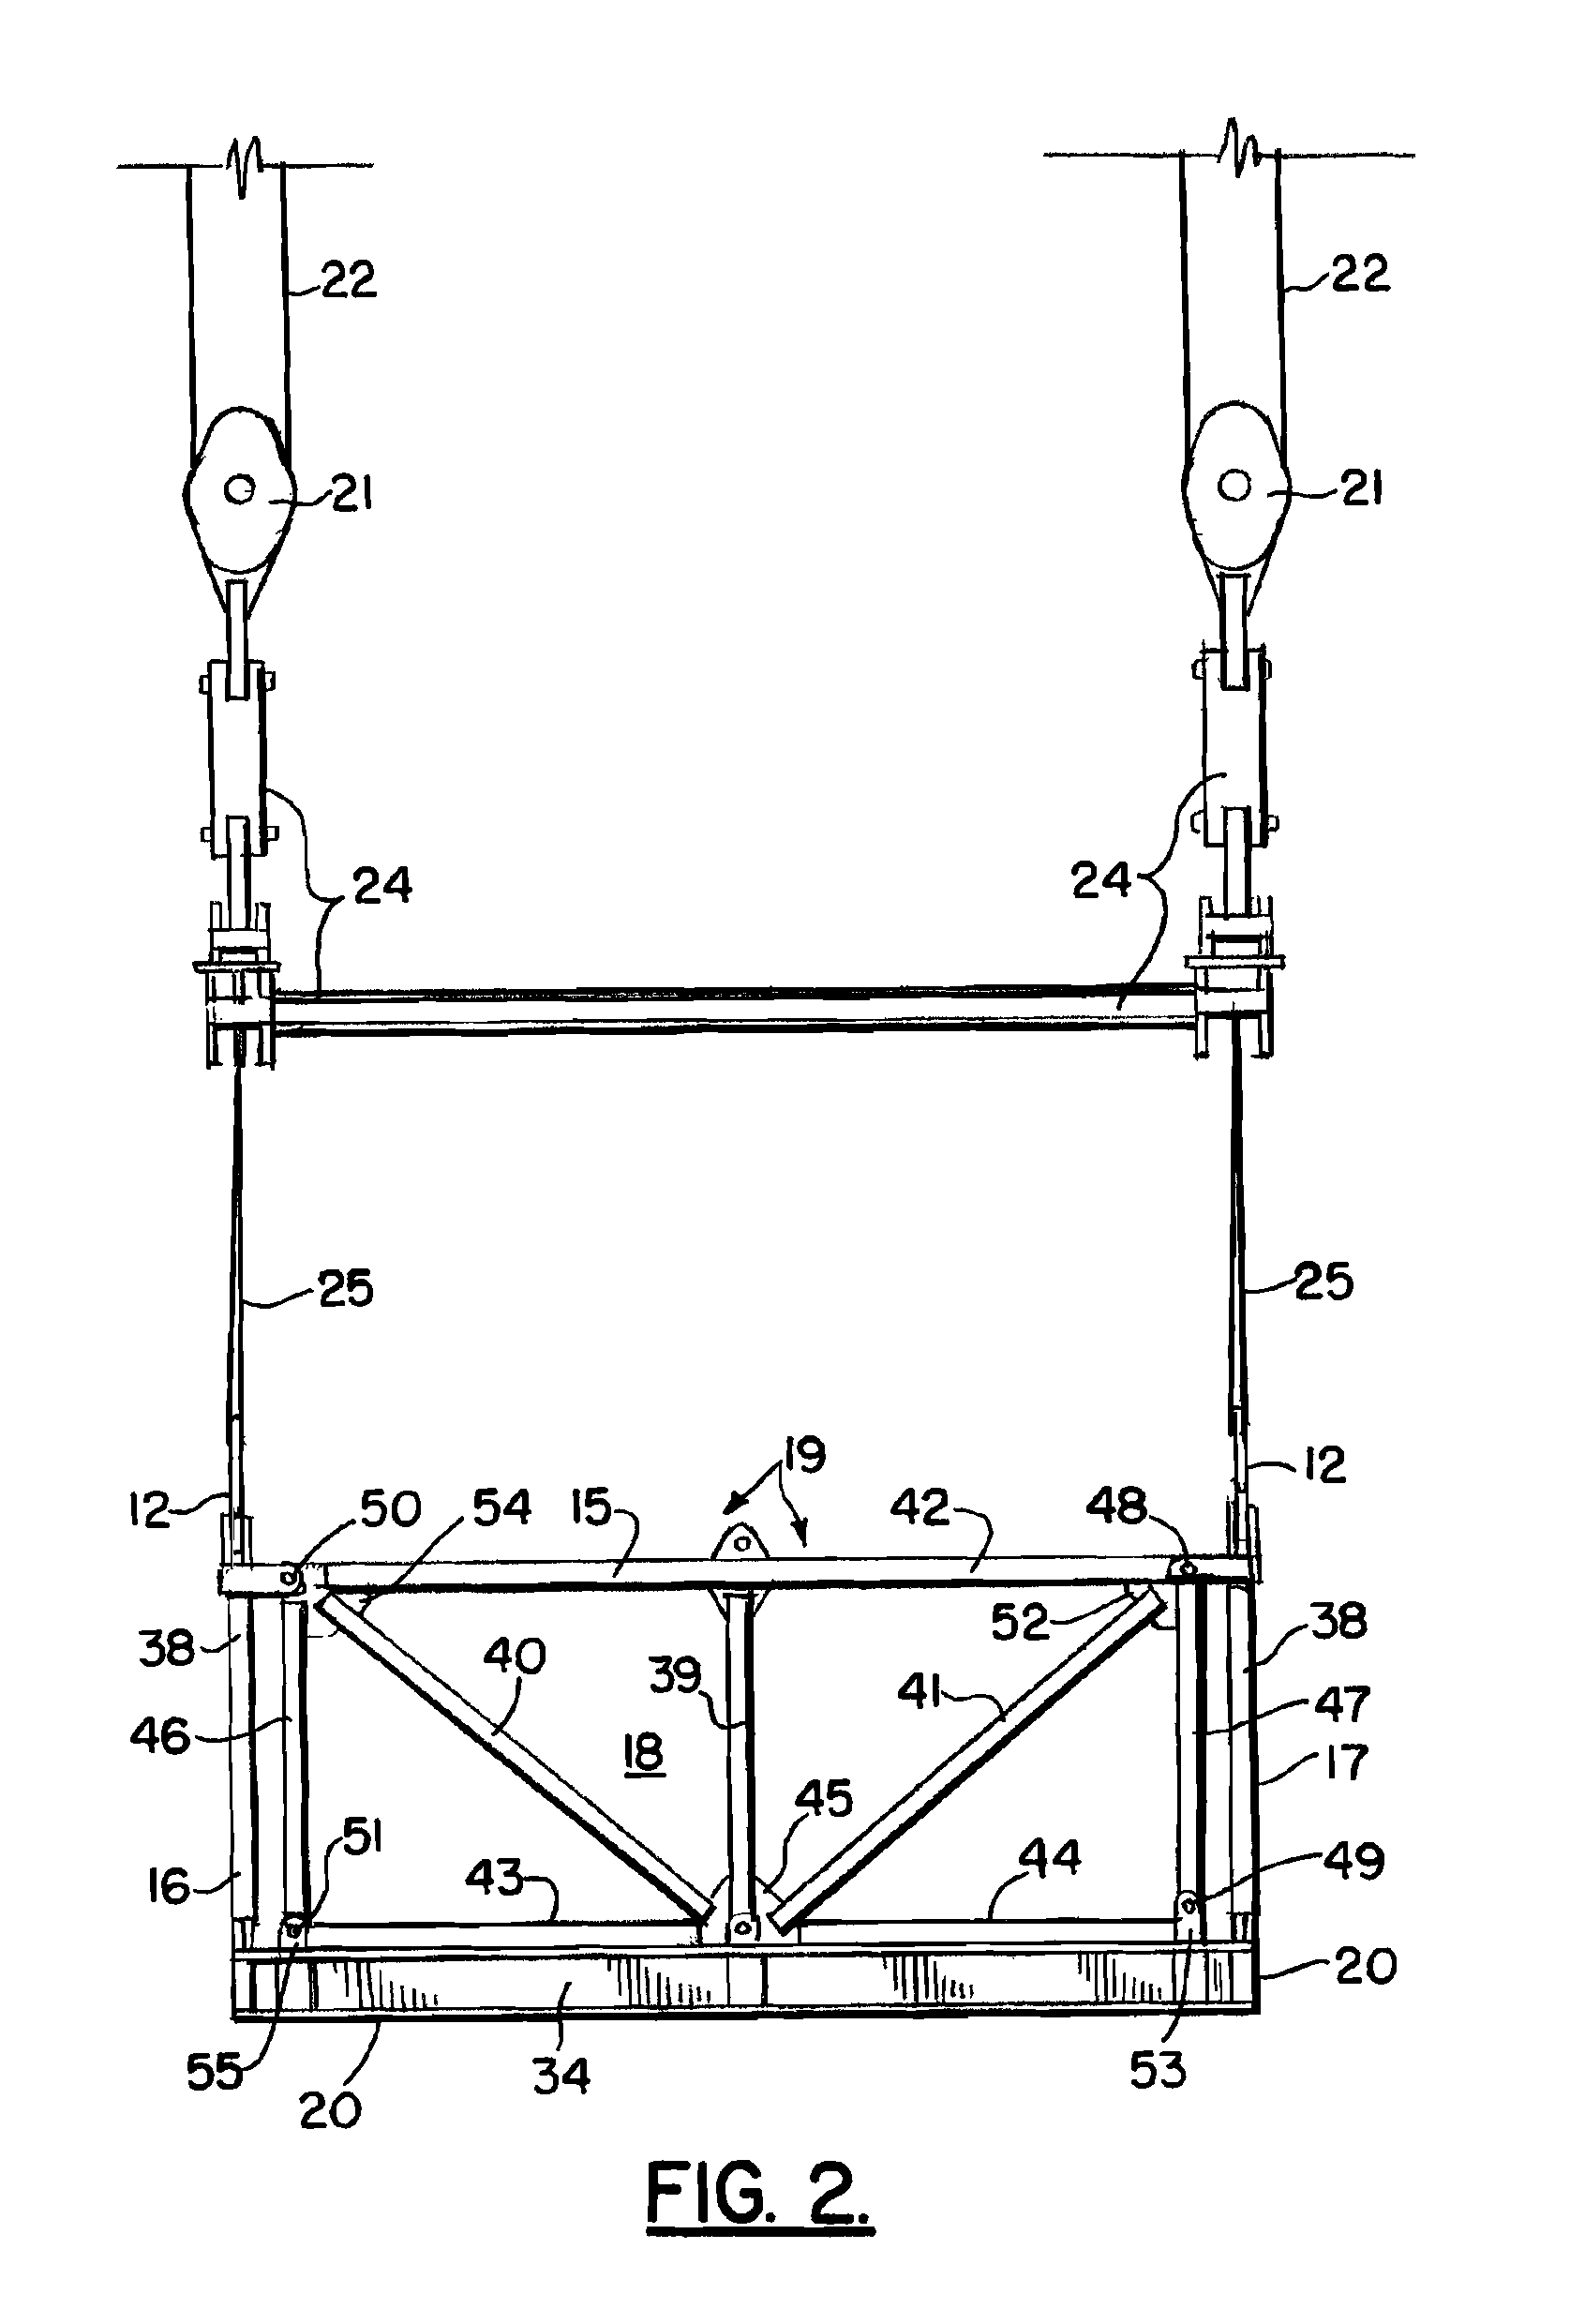 Method and apparatus for salvaging underwater objects